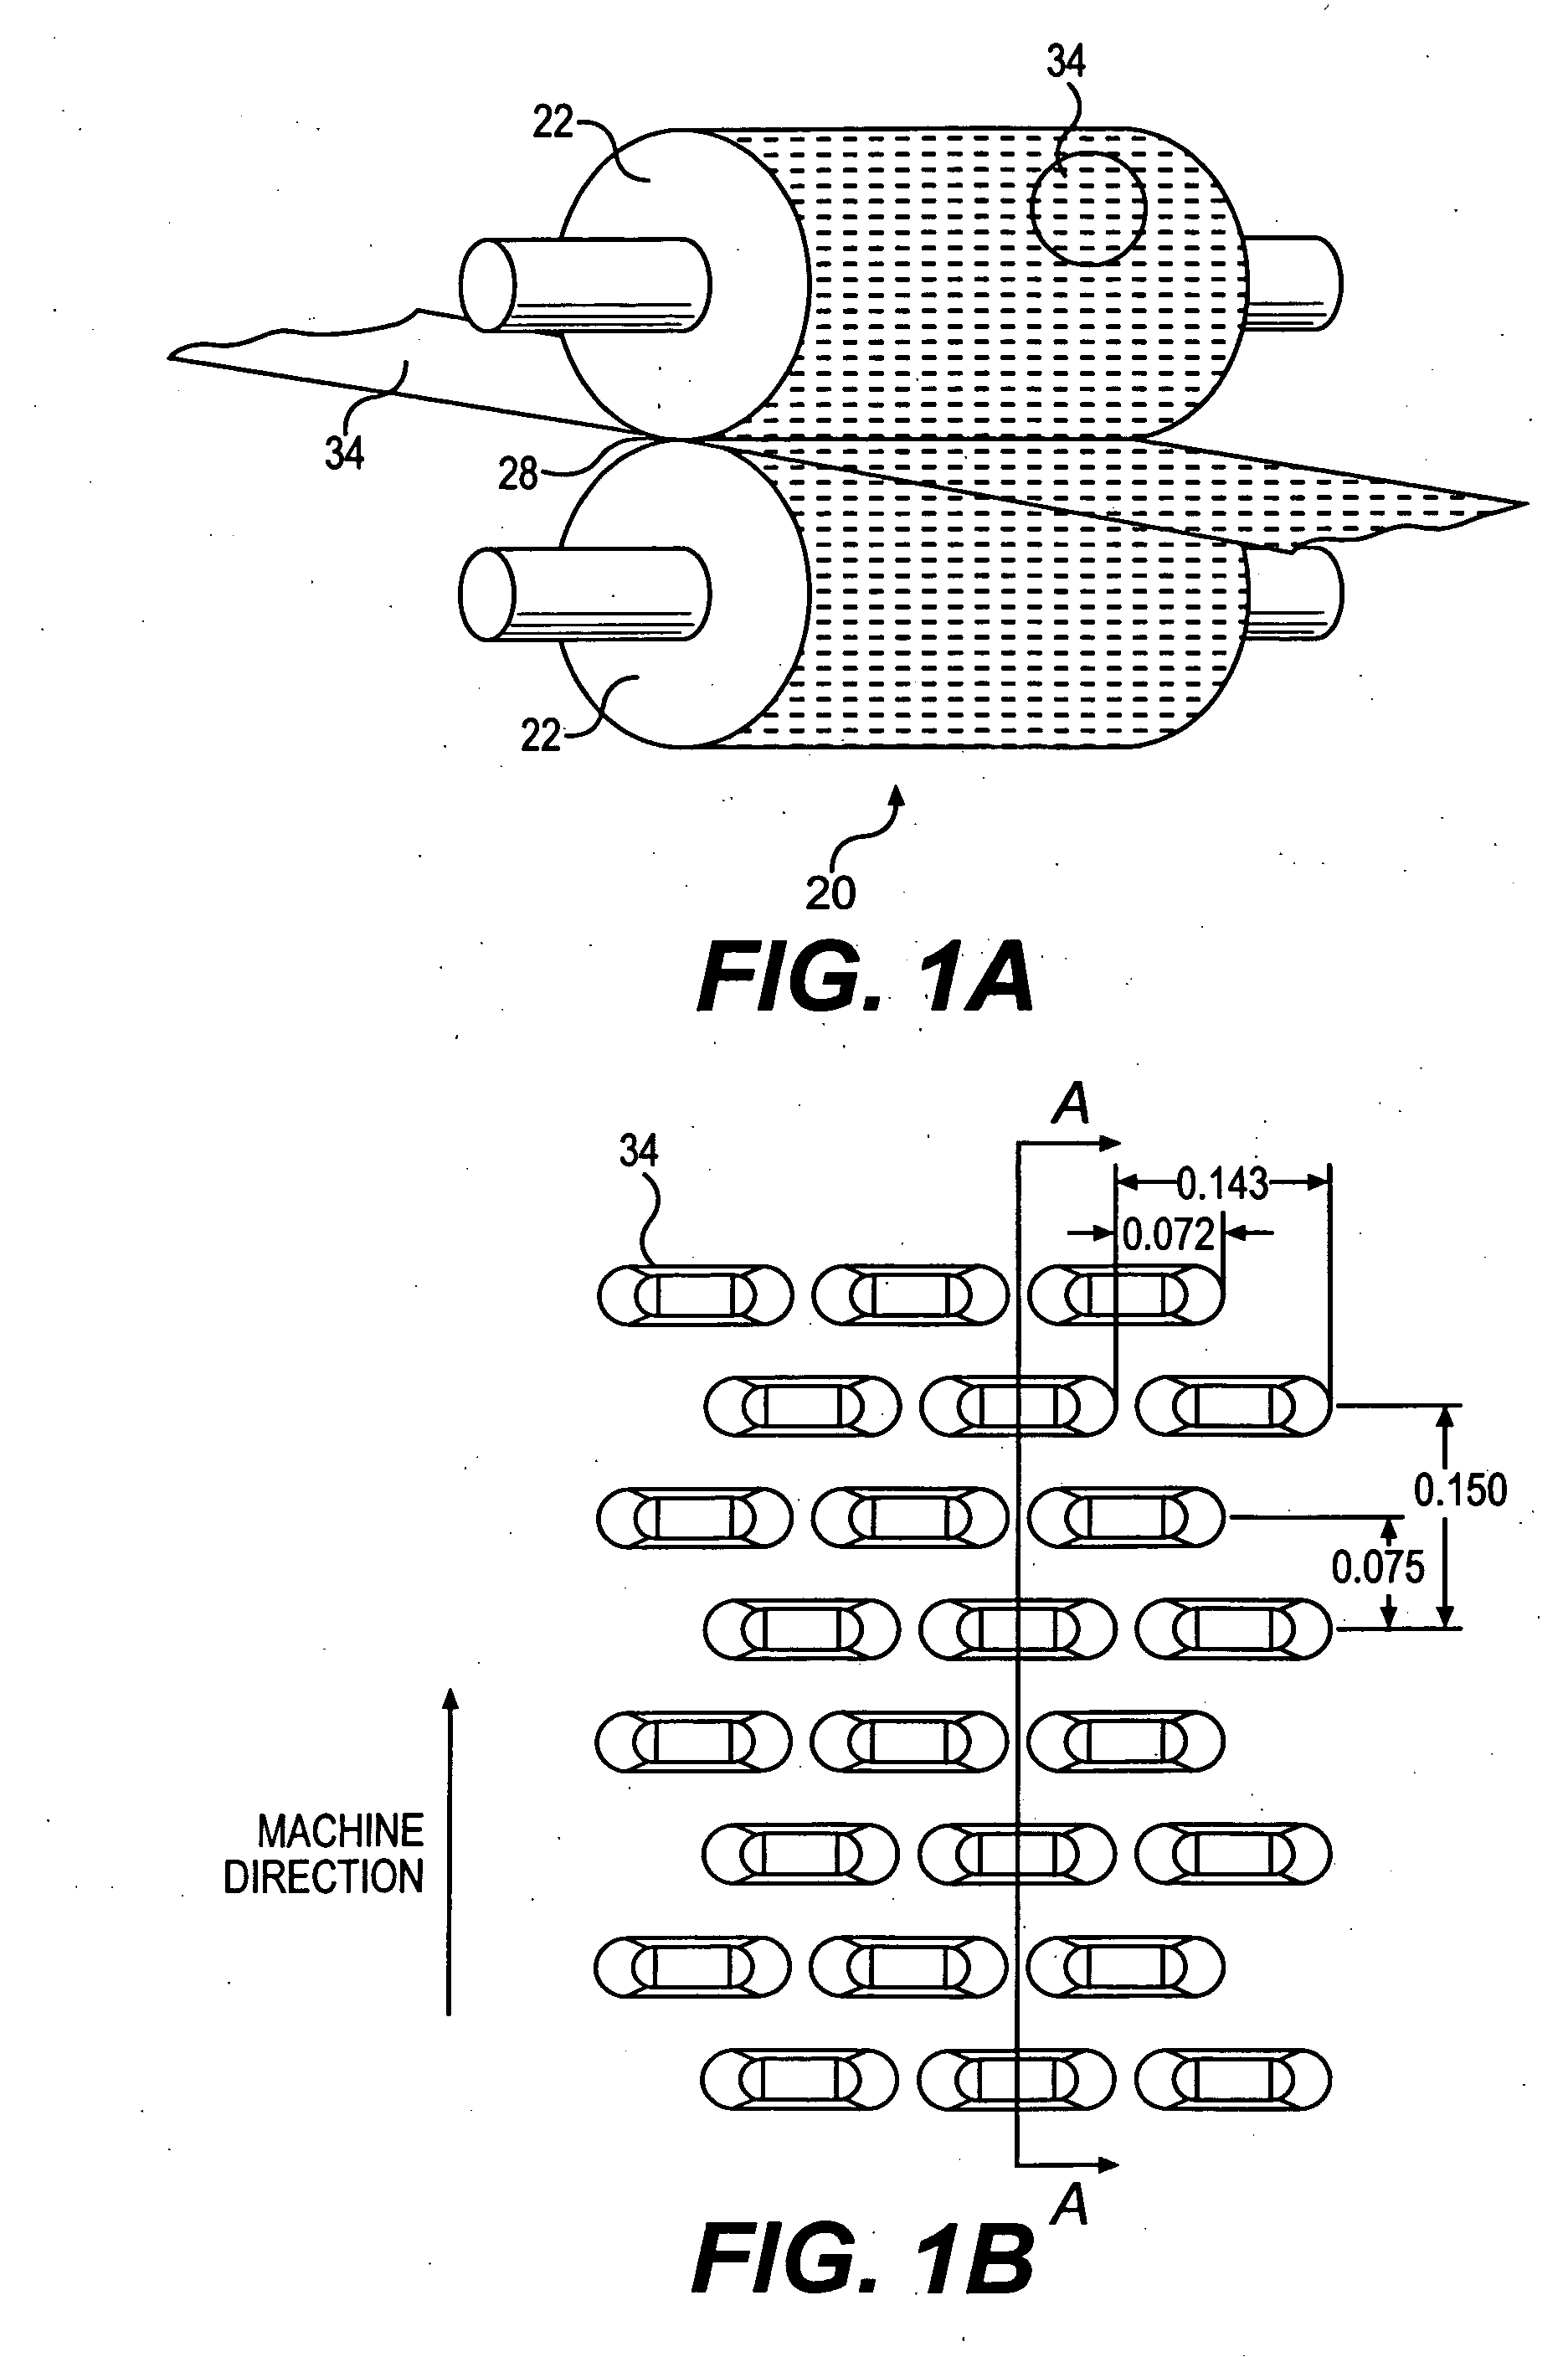 Apparatus and method for degrading a web in the machine direction while preserving cross-machine direction strength